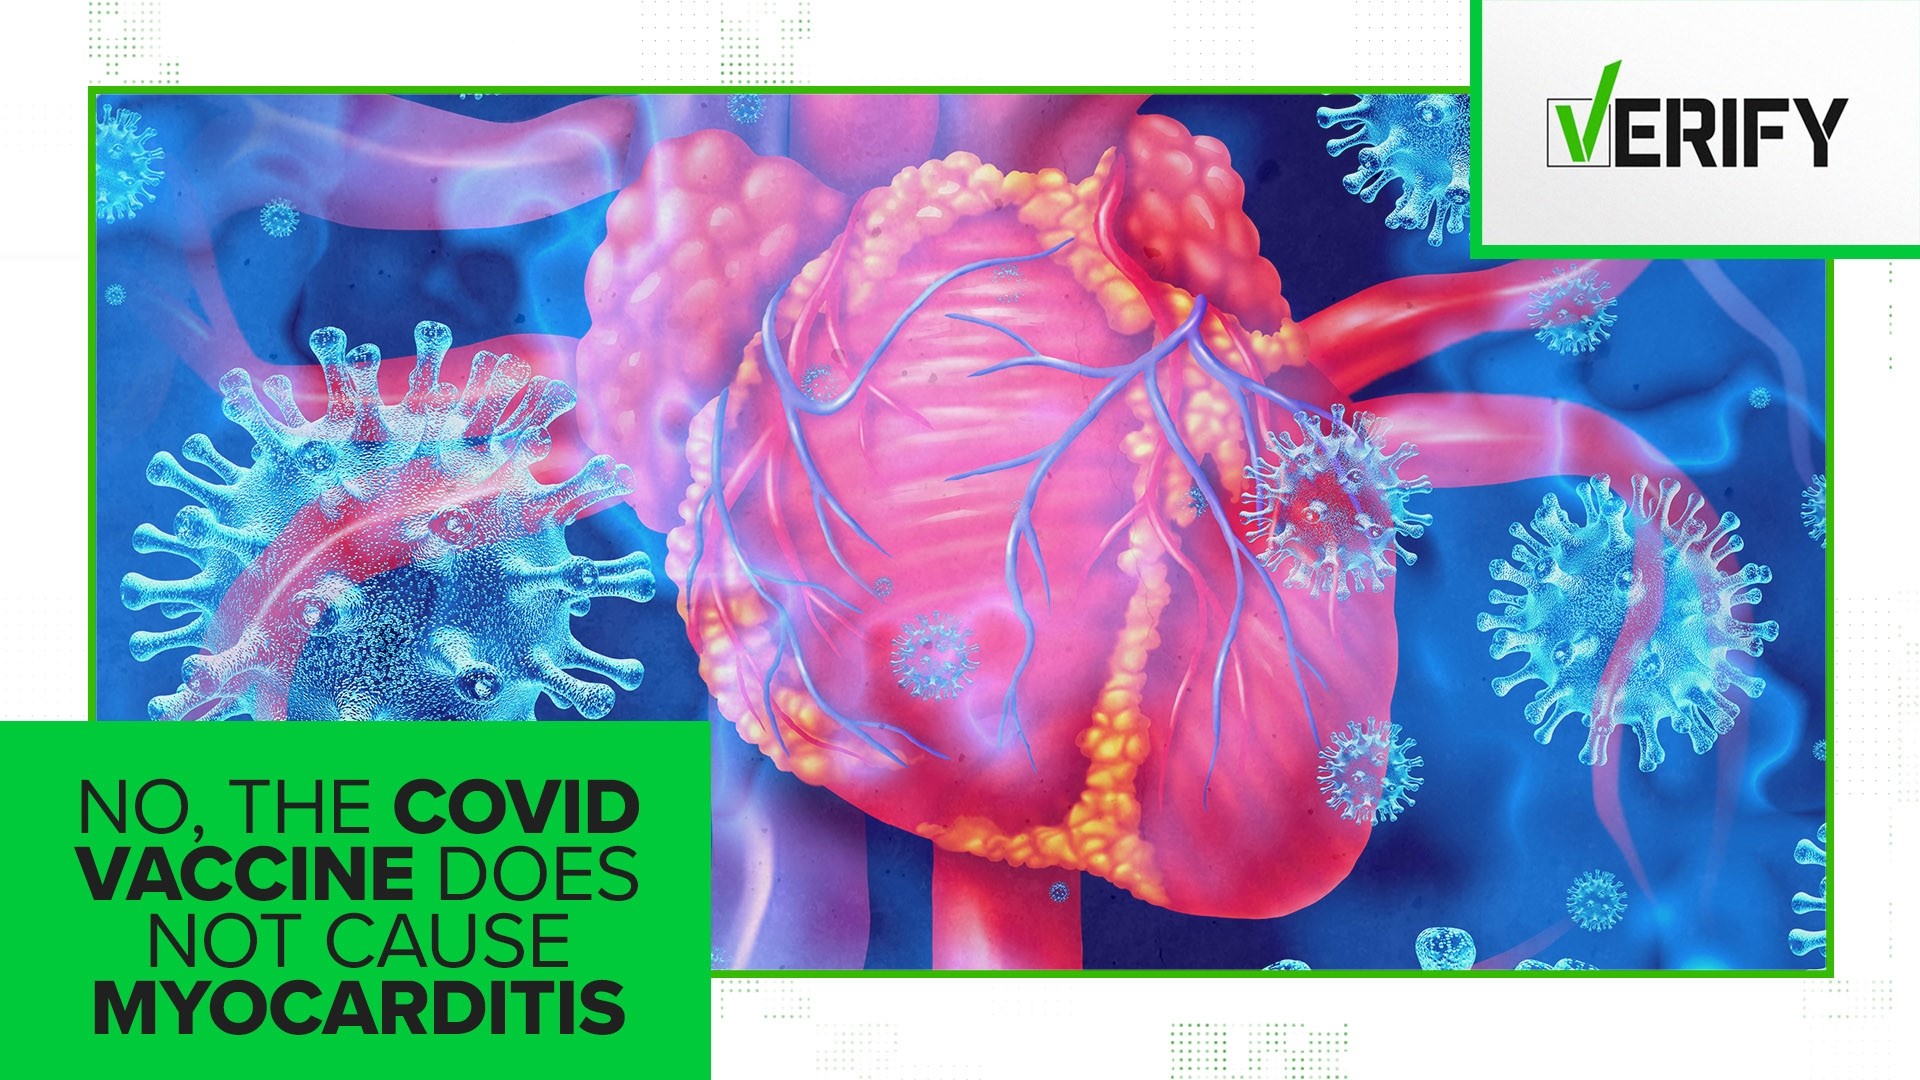 Having COVID-19 makes you 16 times more likely to get myocarditis, a potentially deadly heart condition.